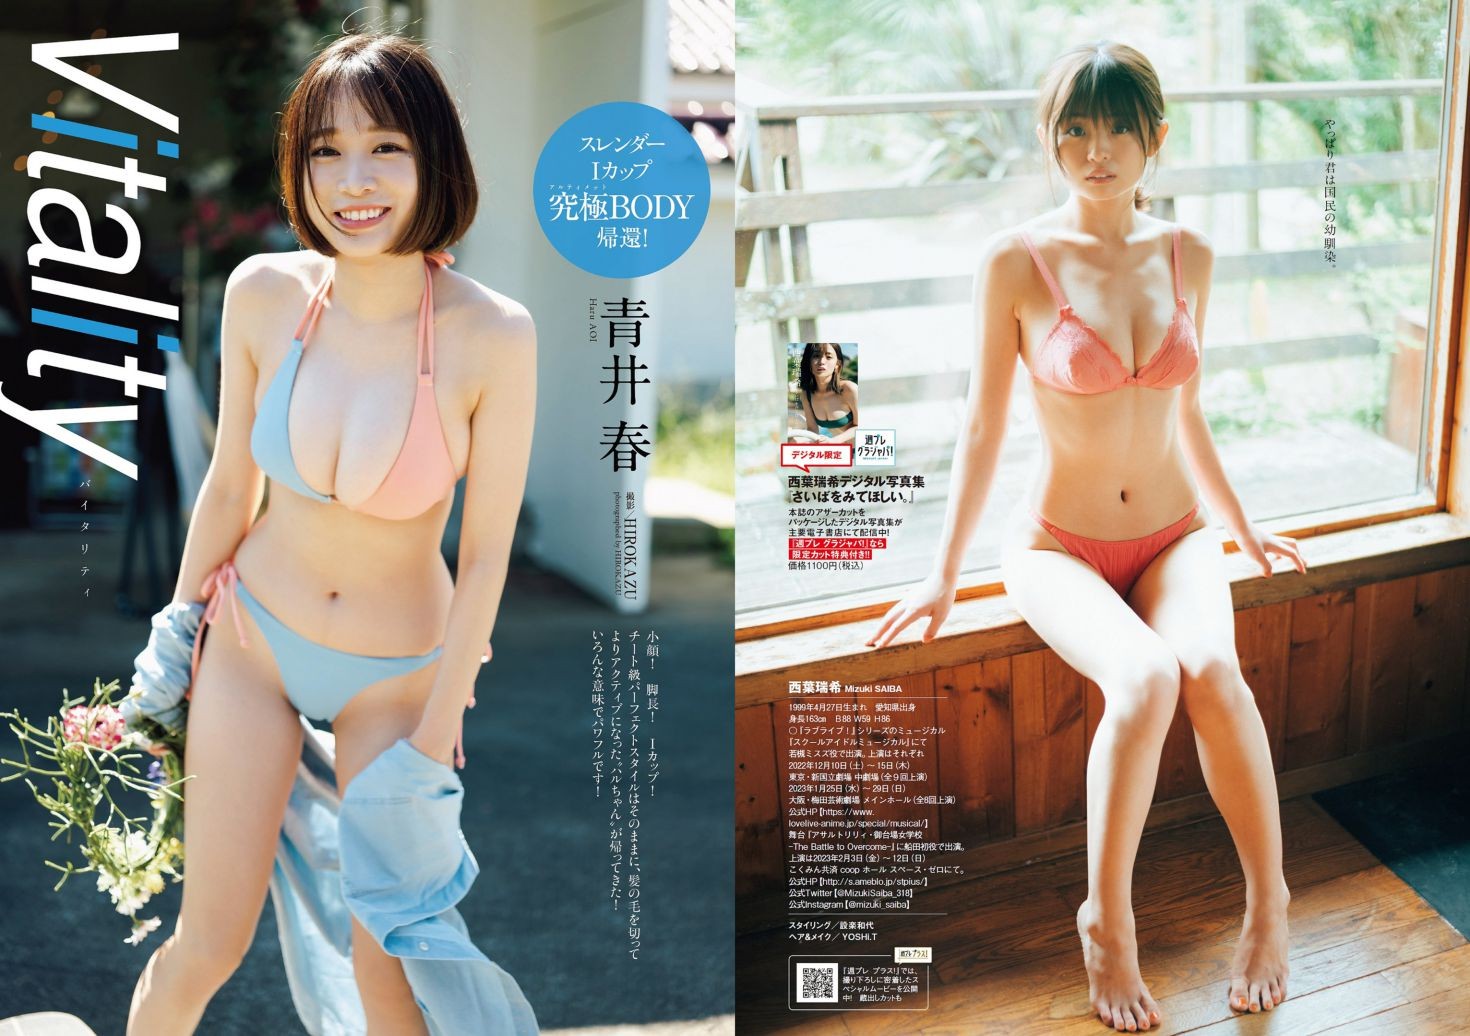 Weekly Playboy 2022 No.52 鷲見玲奈 西葉瑞希 青井春 吉田あかり 山岡雅弥 藤白れもん 藤木由貴 (11)